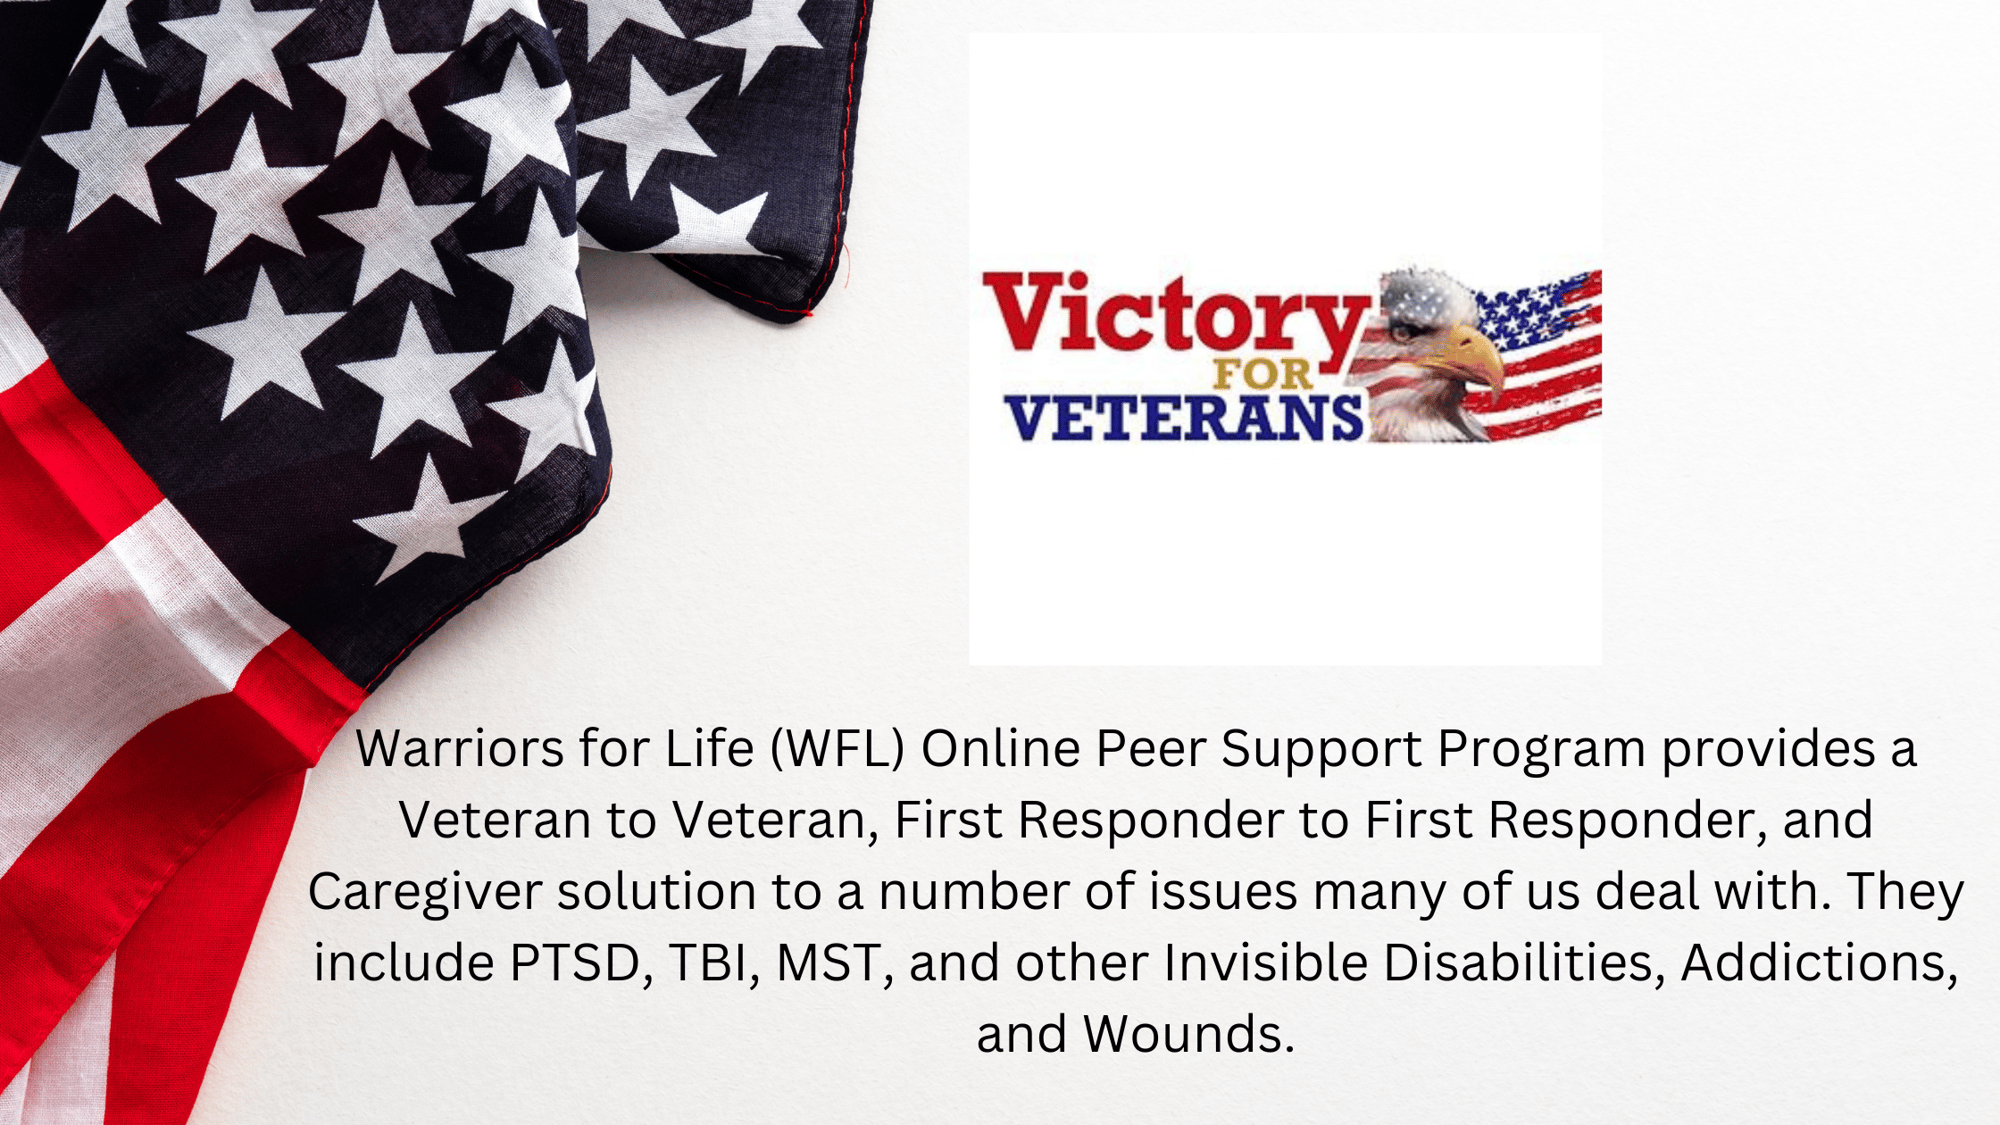 Warriors for Life (WFL) Online Peer Support Program provides a Veteran to Veteran, First Responder to First Responder, and Caregiver solution to a num